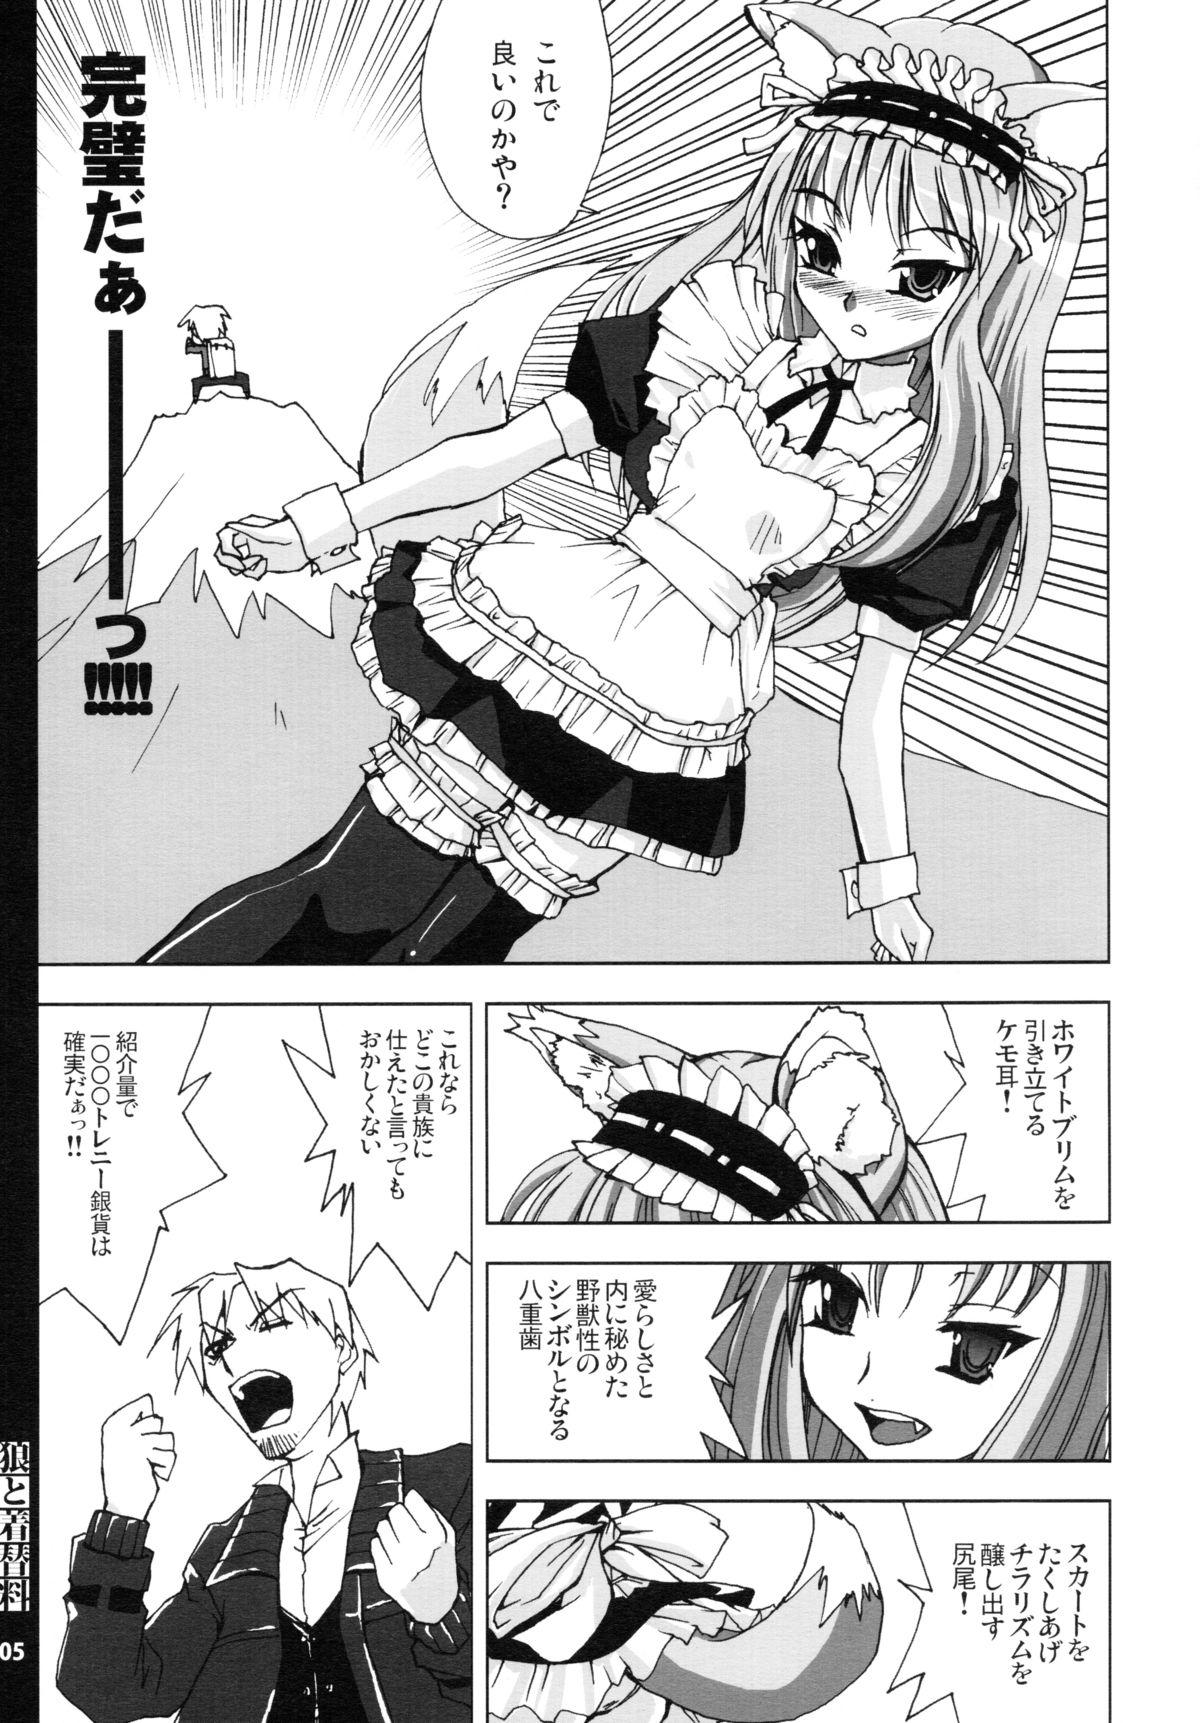 Masturbates Ookami to Cosplay-ryou - Spice and wolf Titten - Page 5